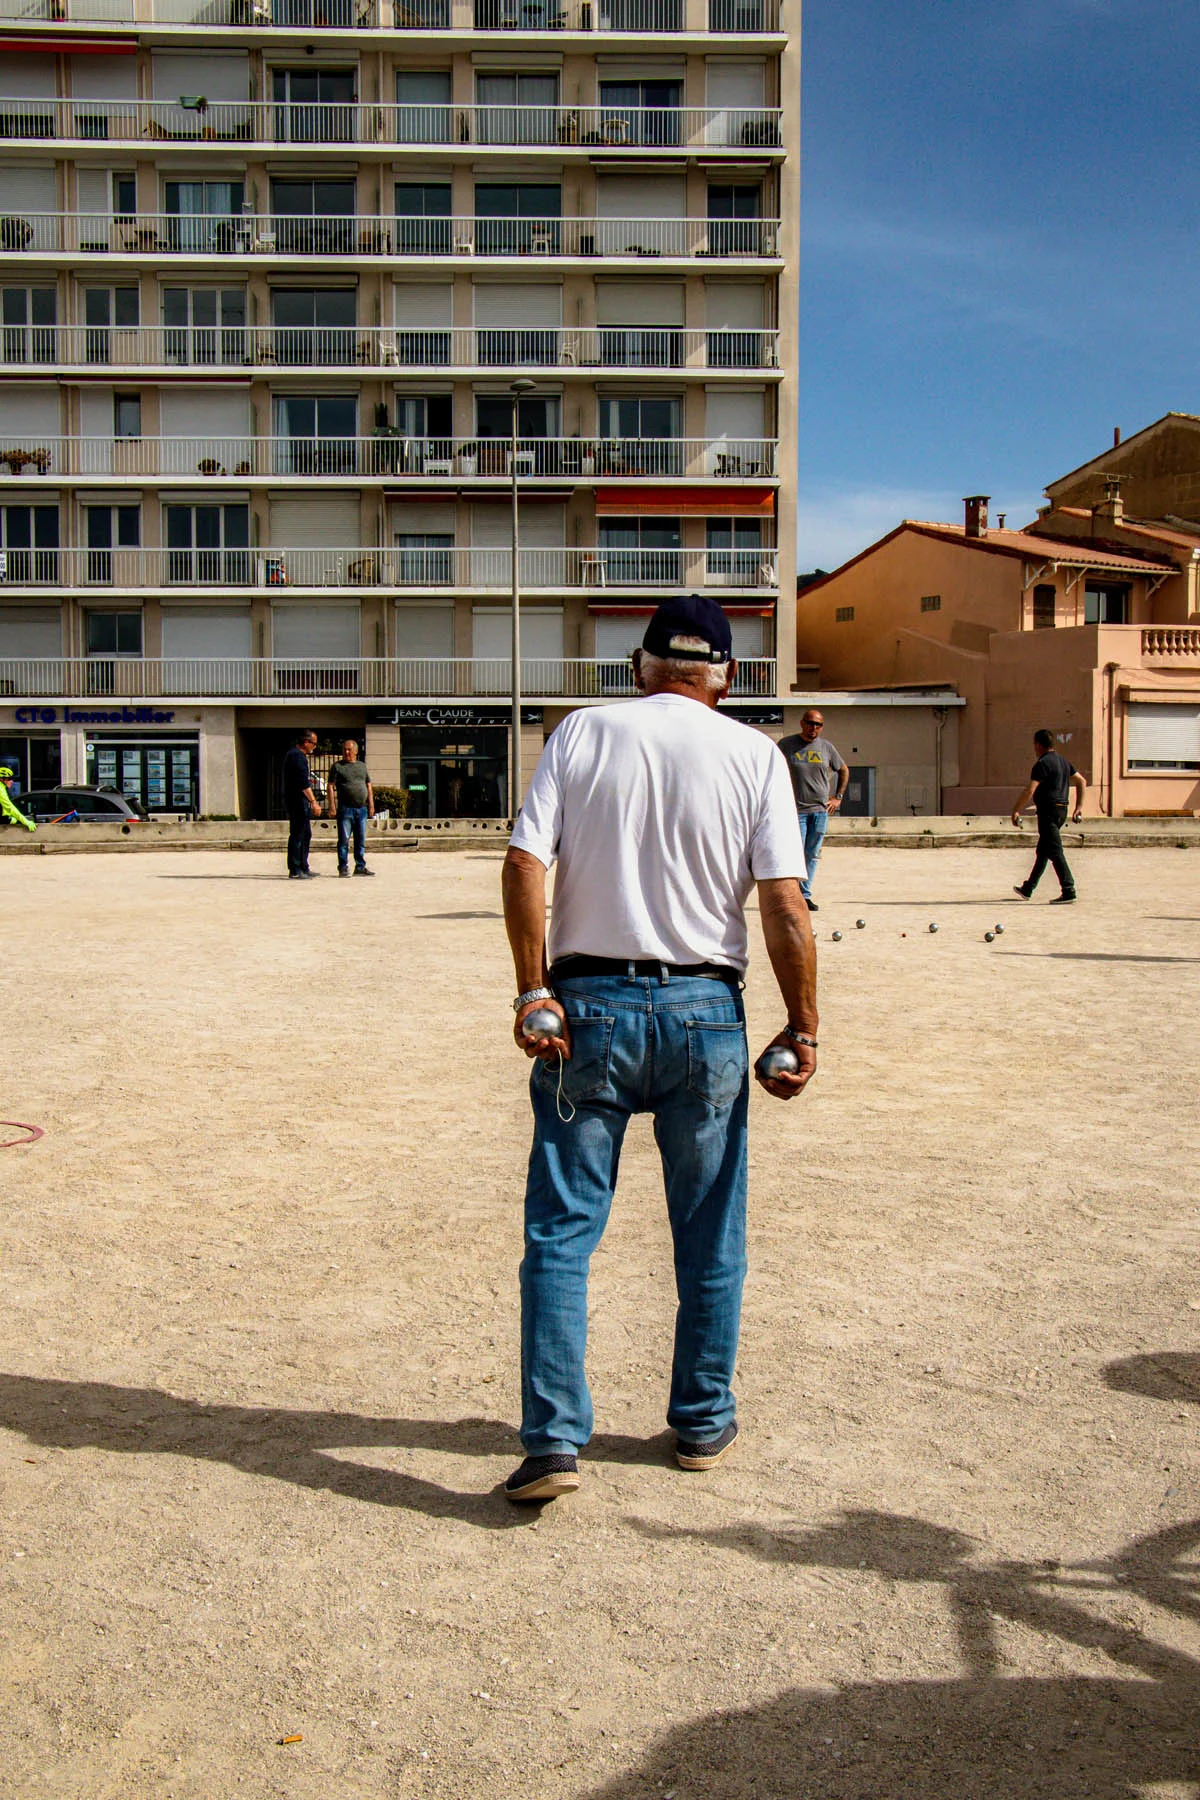 A photograph of a man wearing a white t-shirt, jeans, and a cap, playing a game of Pétanque in front of a block of apartments on a sunny day. 